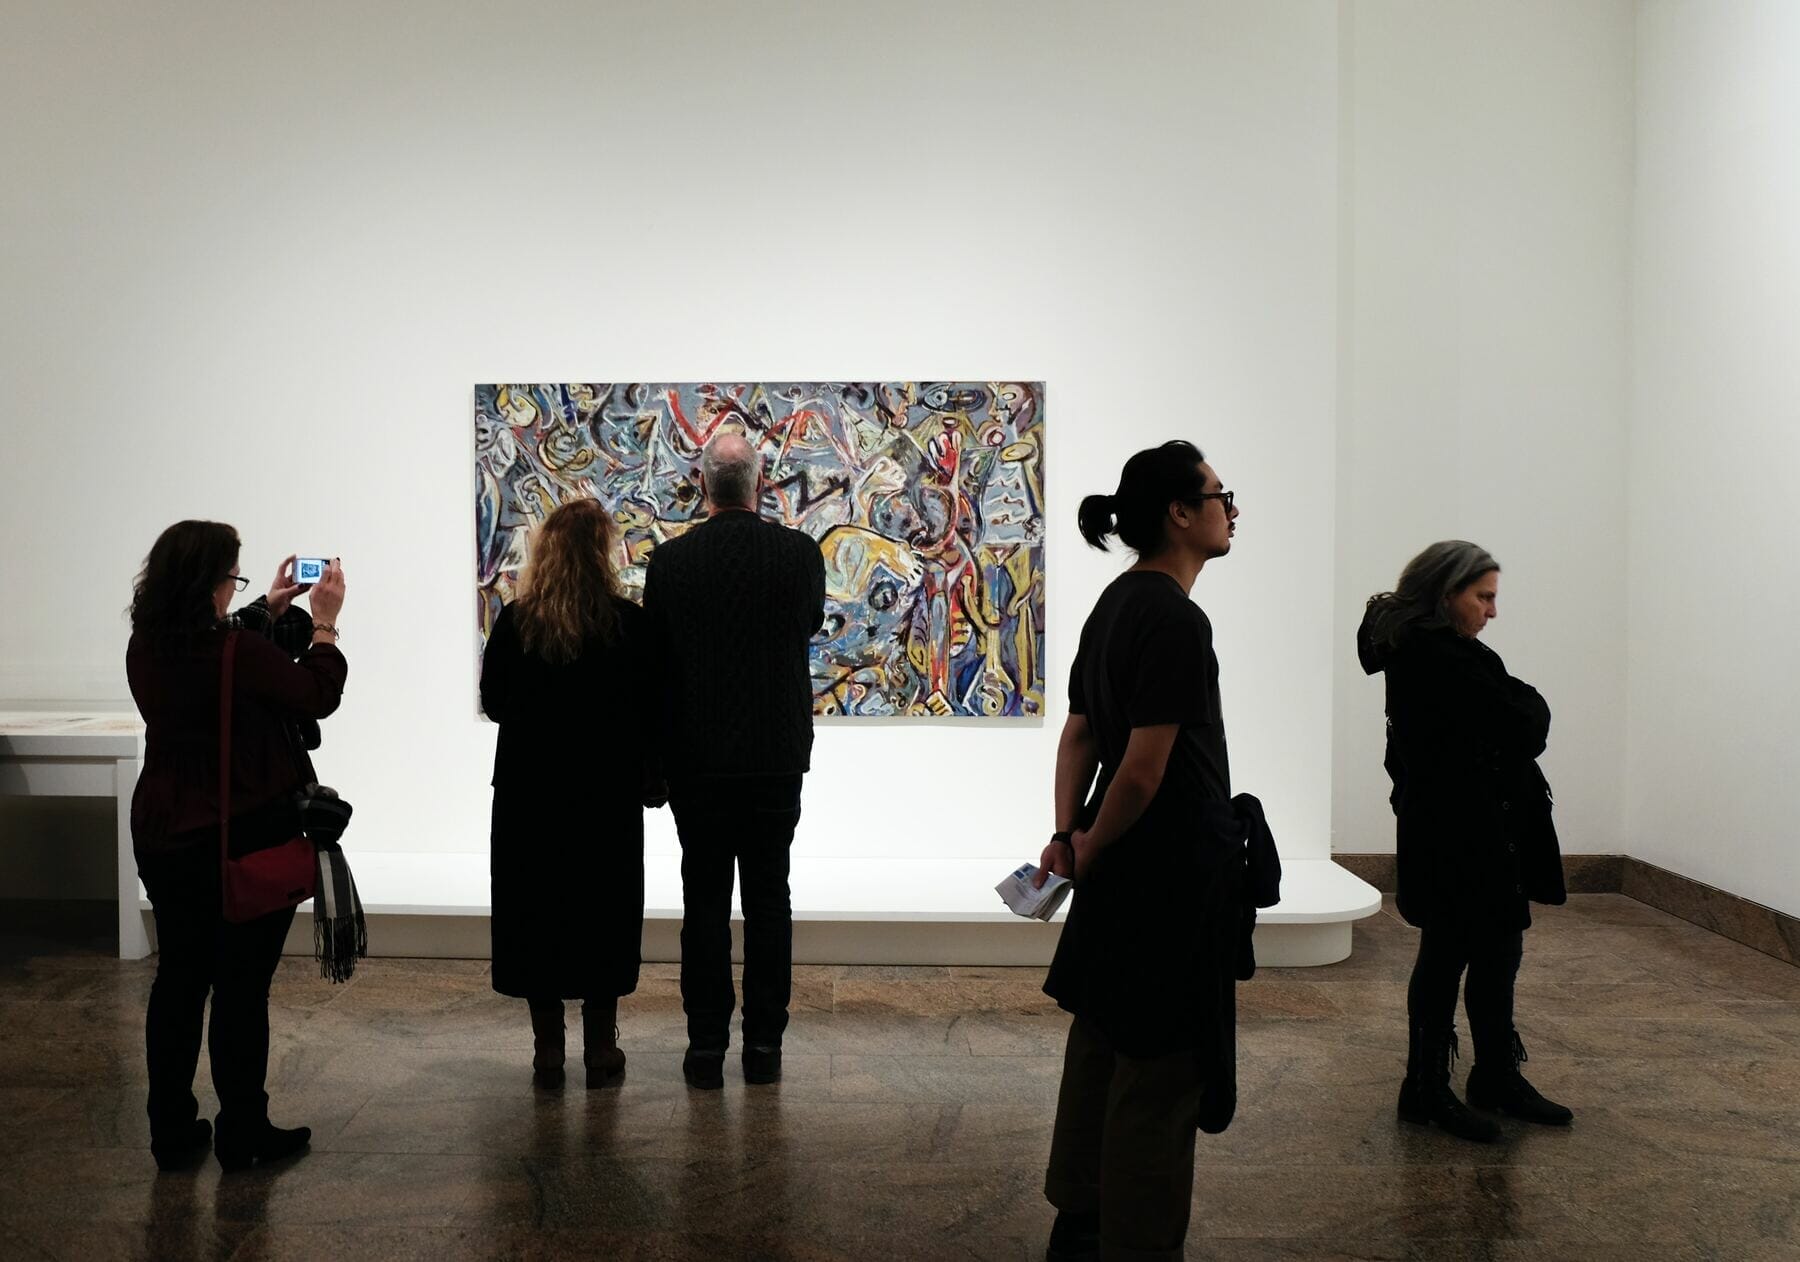 Five people looking at a painting